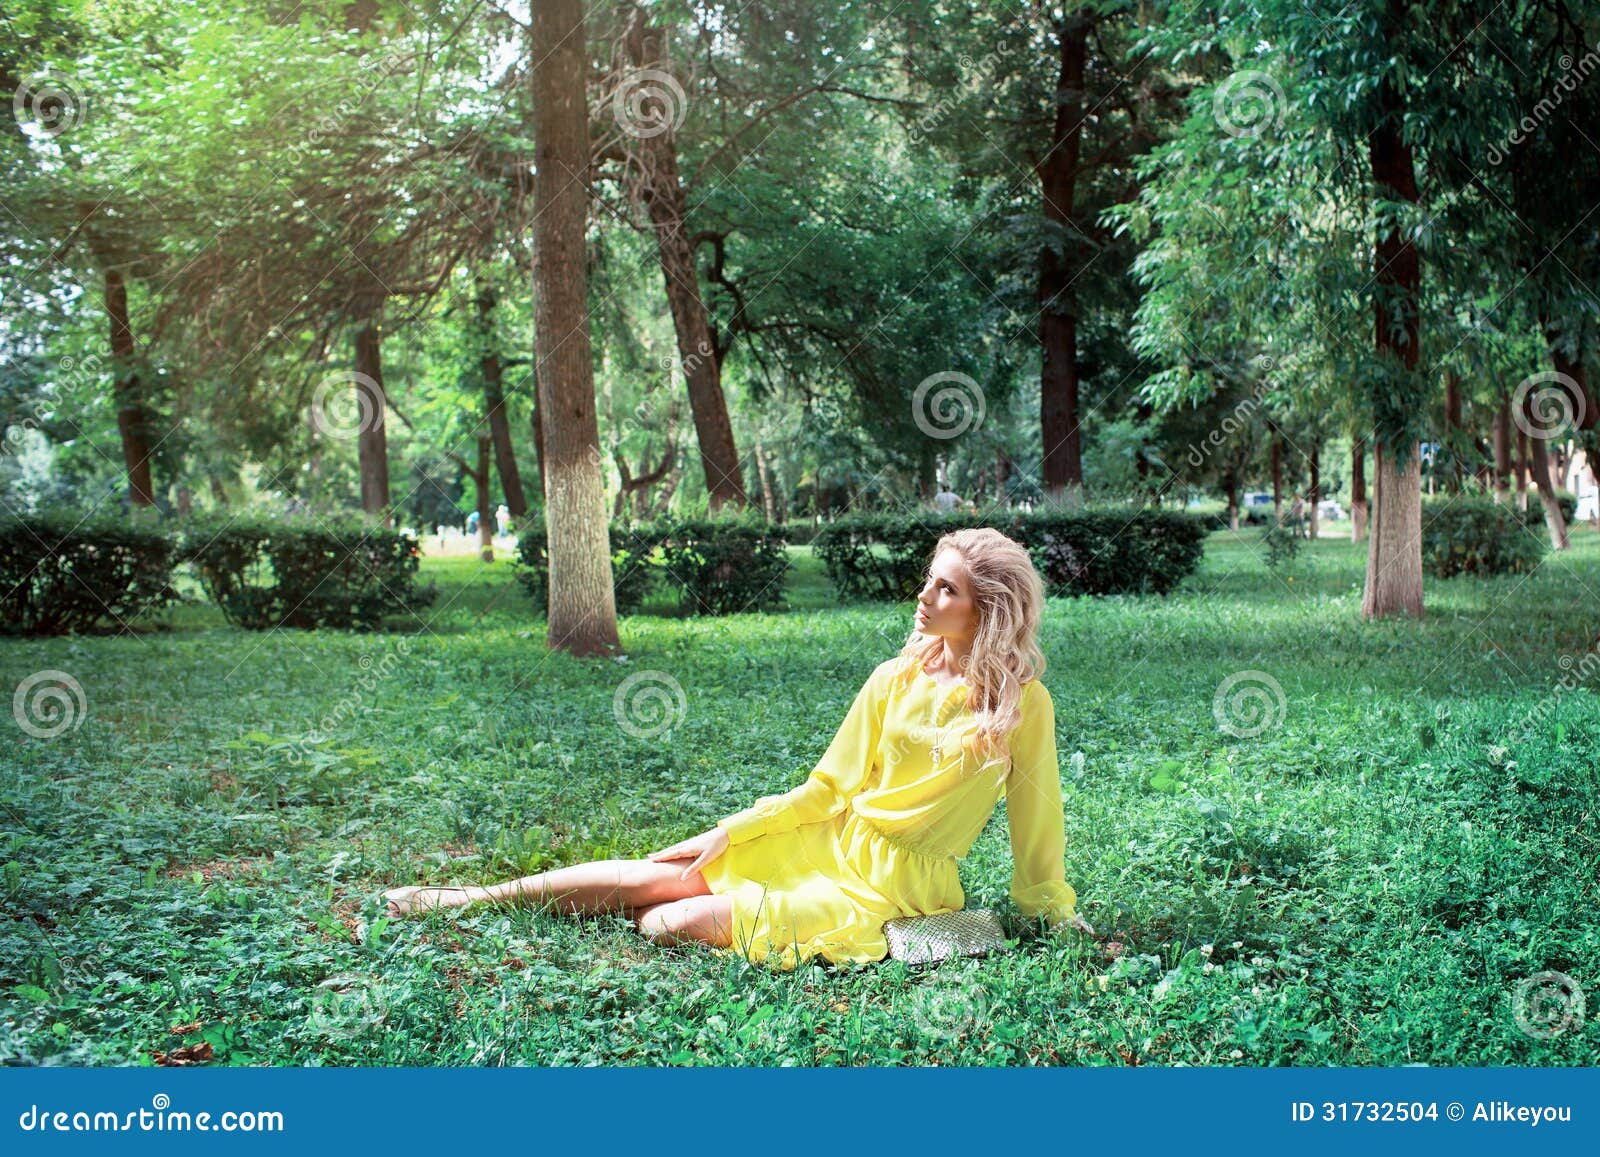 Beautiful Young Blond Woman in a Dress Outdoor Stock Photo - Image of ...